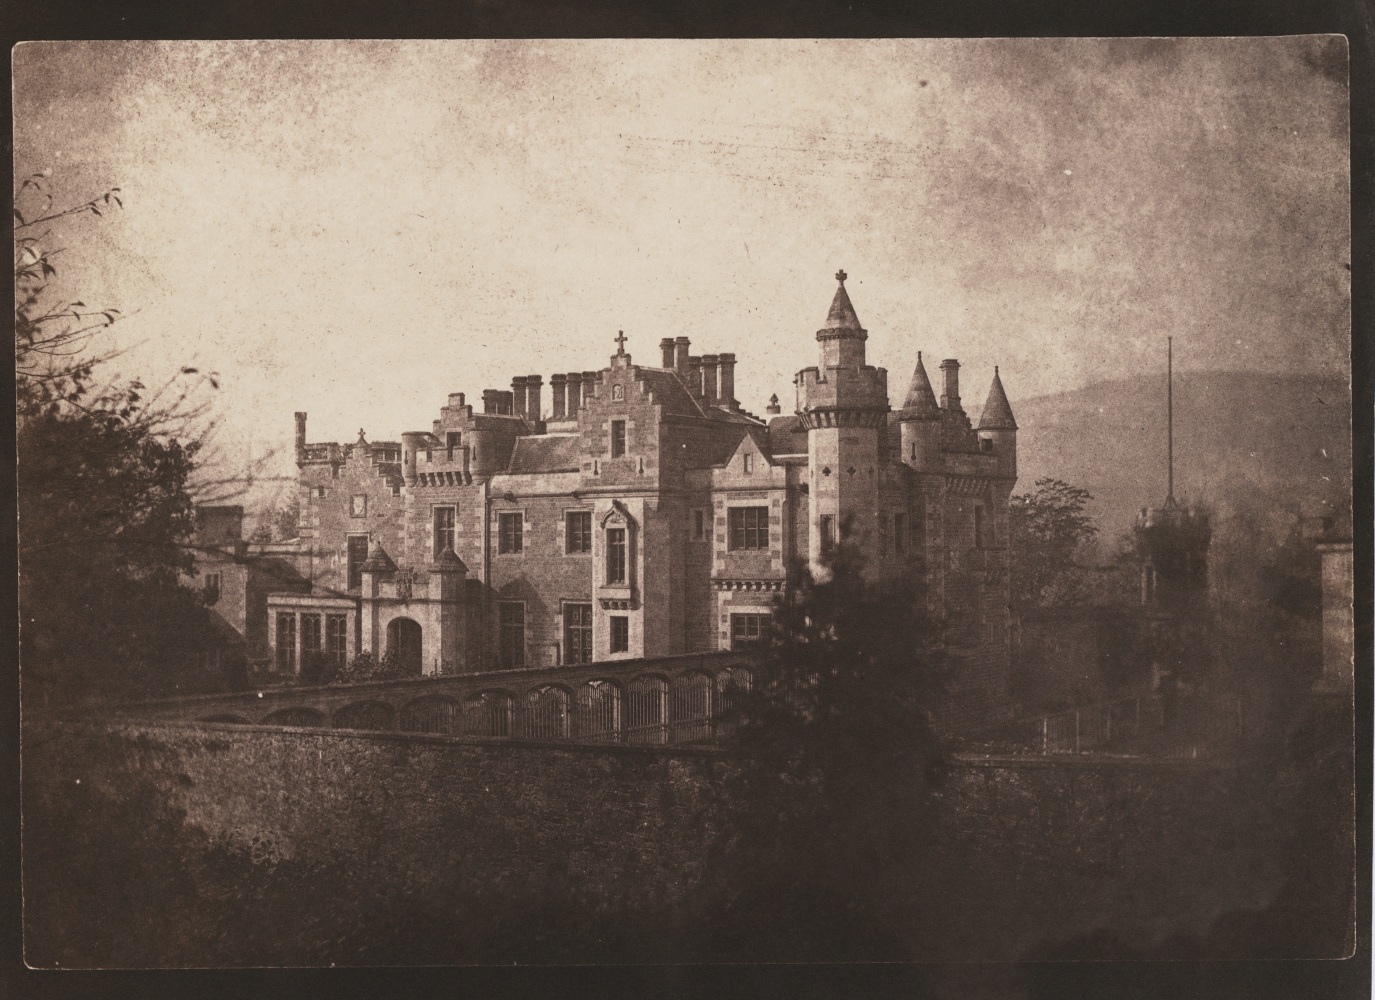 William Henry Fox TALBOT (English, 1800-1877) &quot;Abbotsford&quot;, 1844 Salt print from a calotype negative 15.3 x 22.0 cm on 18.5 x 22.9 cm paper Titled in pencil, and &quot;LA27&quot; in black ink, on verso